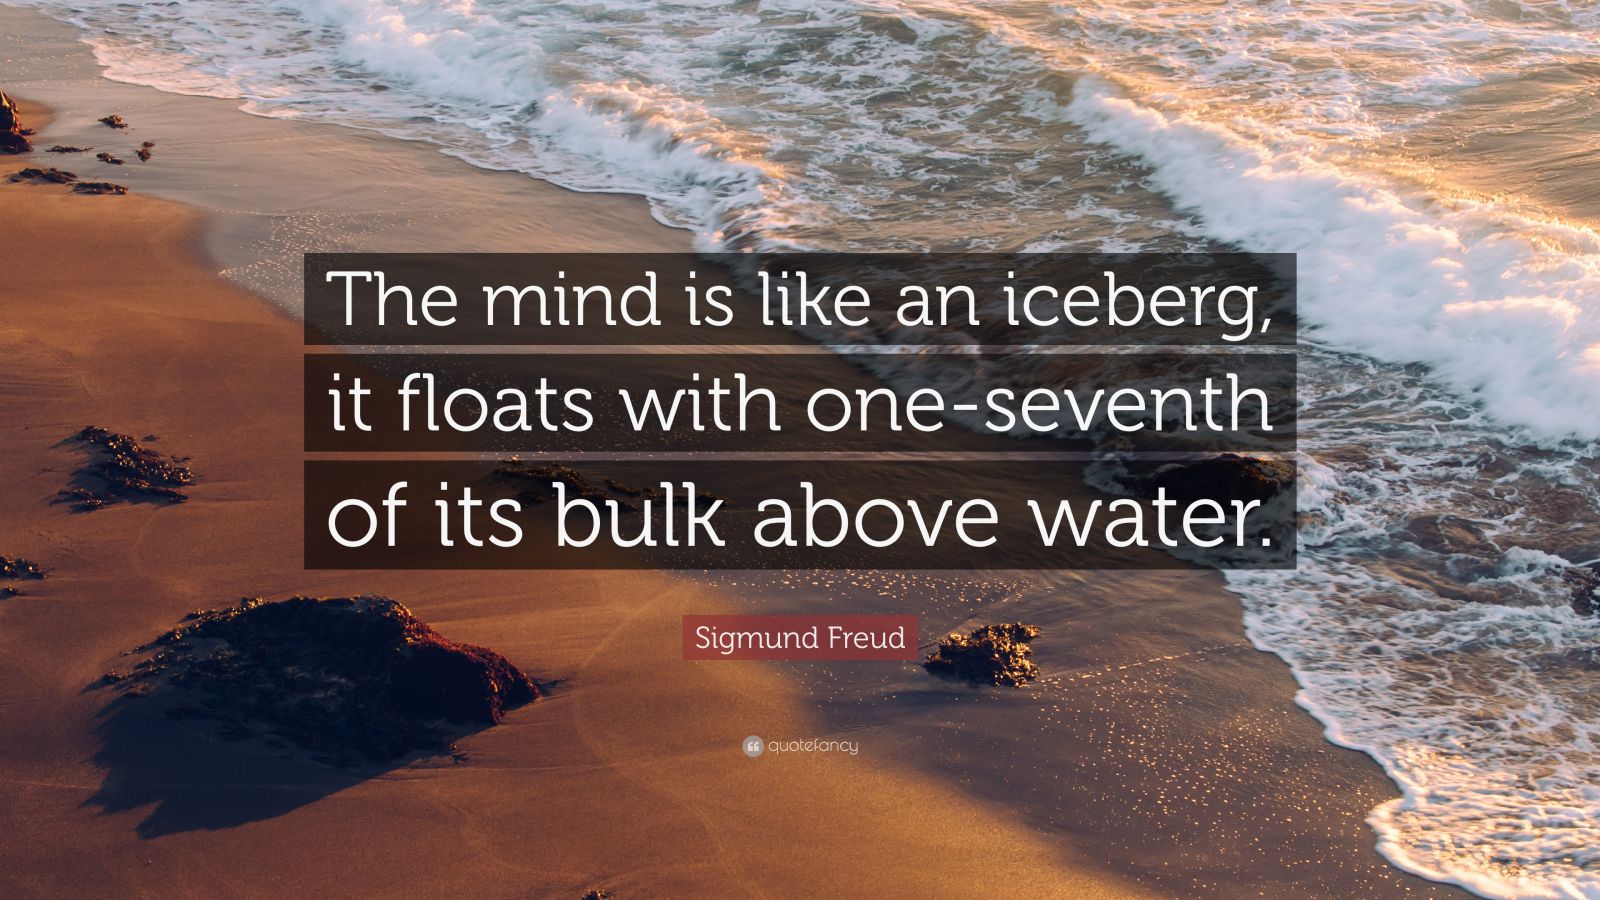 Sigmund Freud Quote: "The mind is like an iceberg, it floats with one-seventh of its bulk above ...